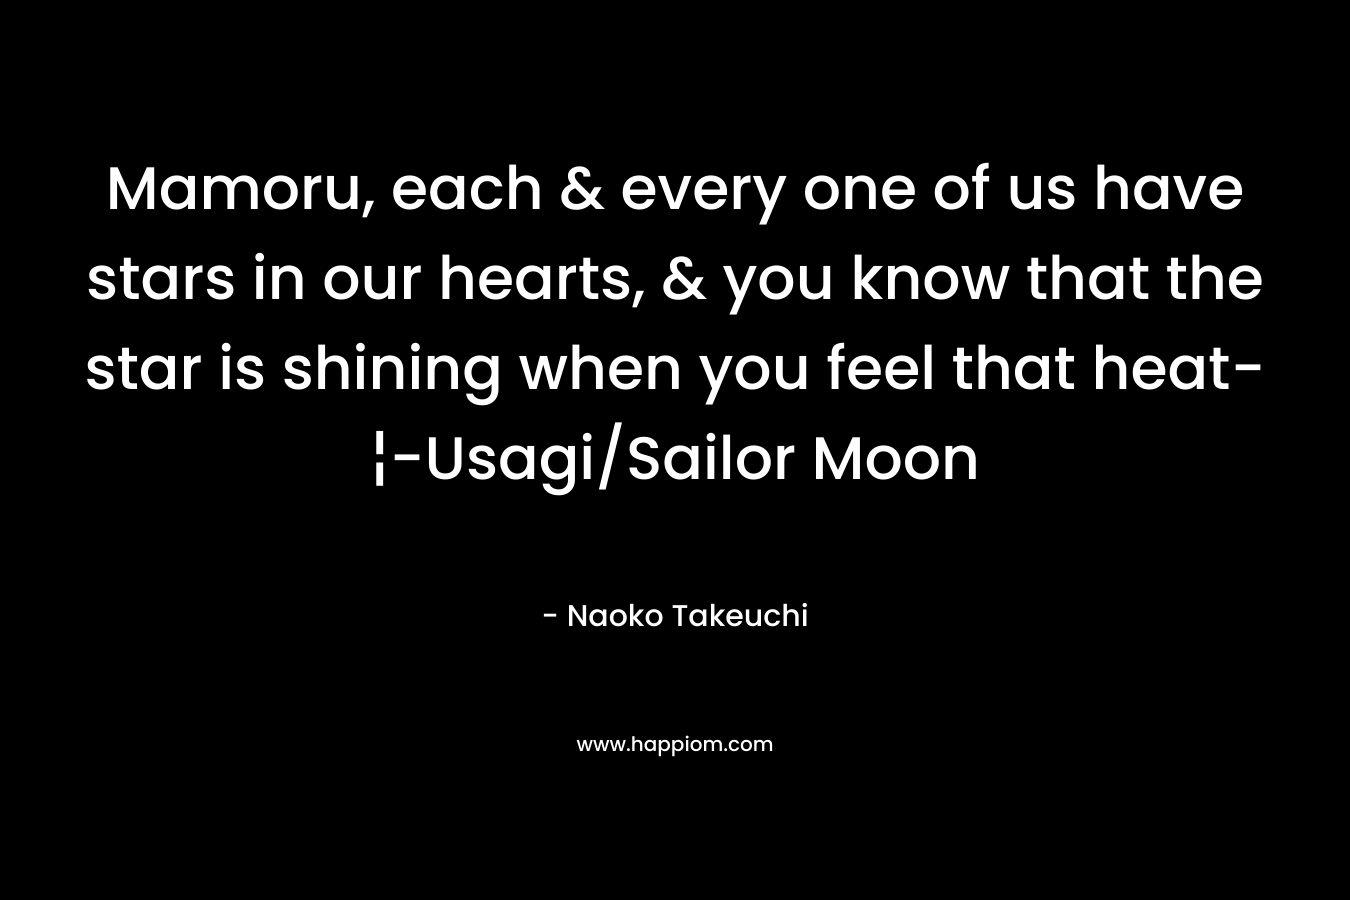 Mamoru, each & every one of us have stars in our hearts, & you know that the star is shining when you feel that heat-¦-Usagi/Sailor Moon